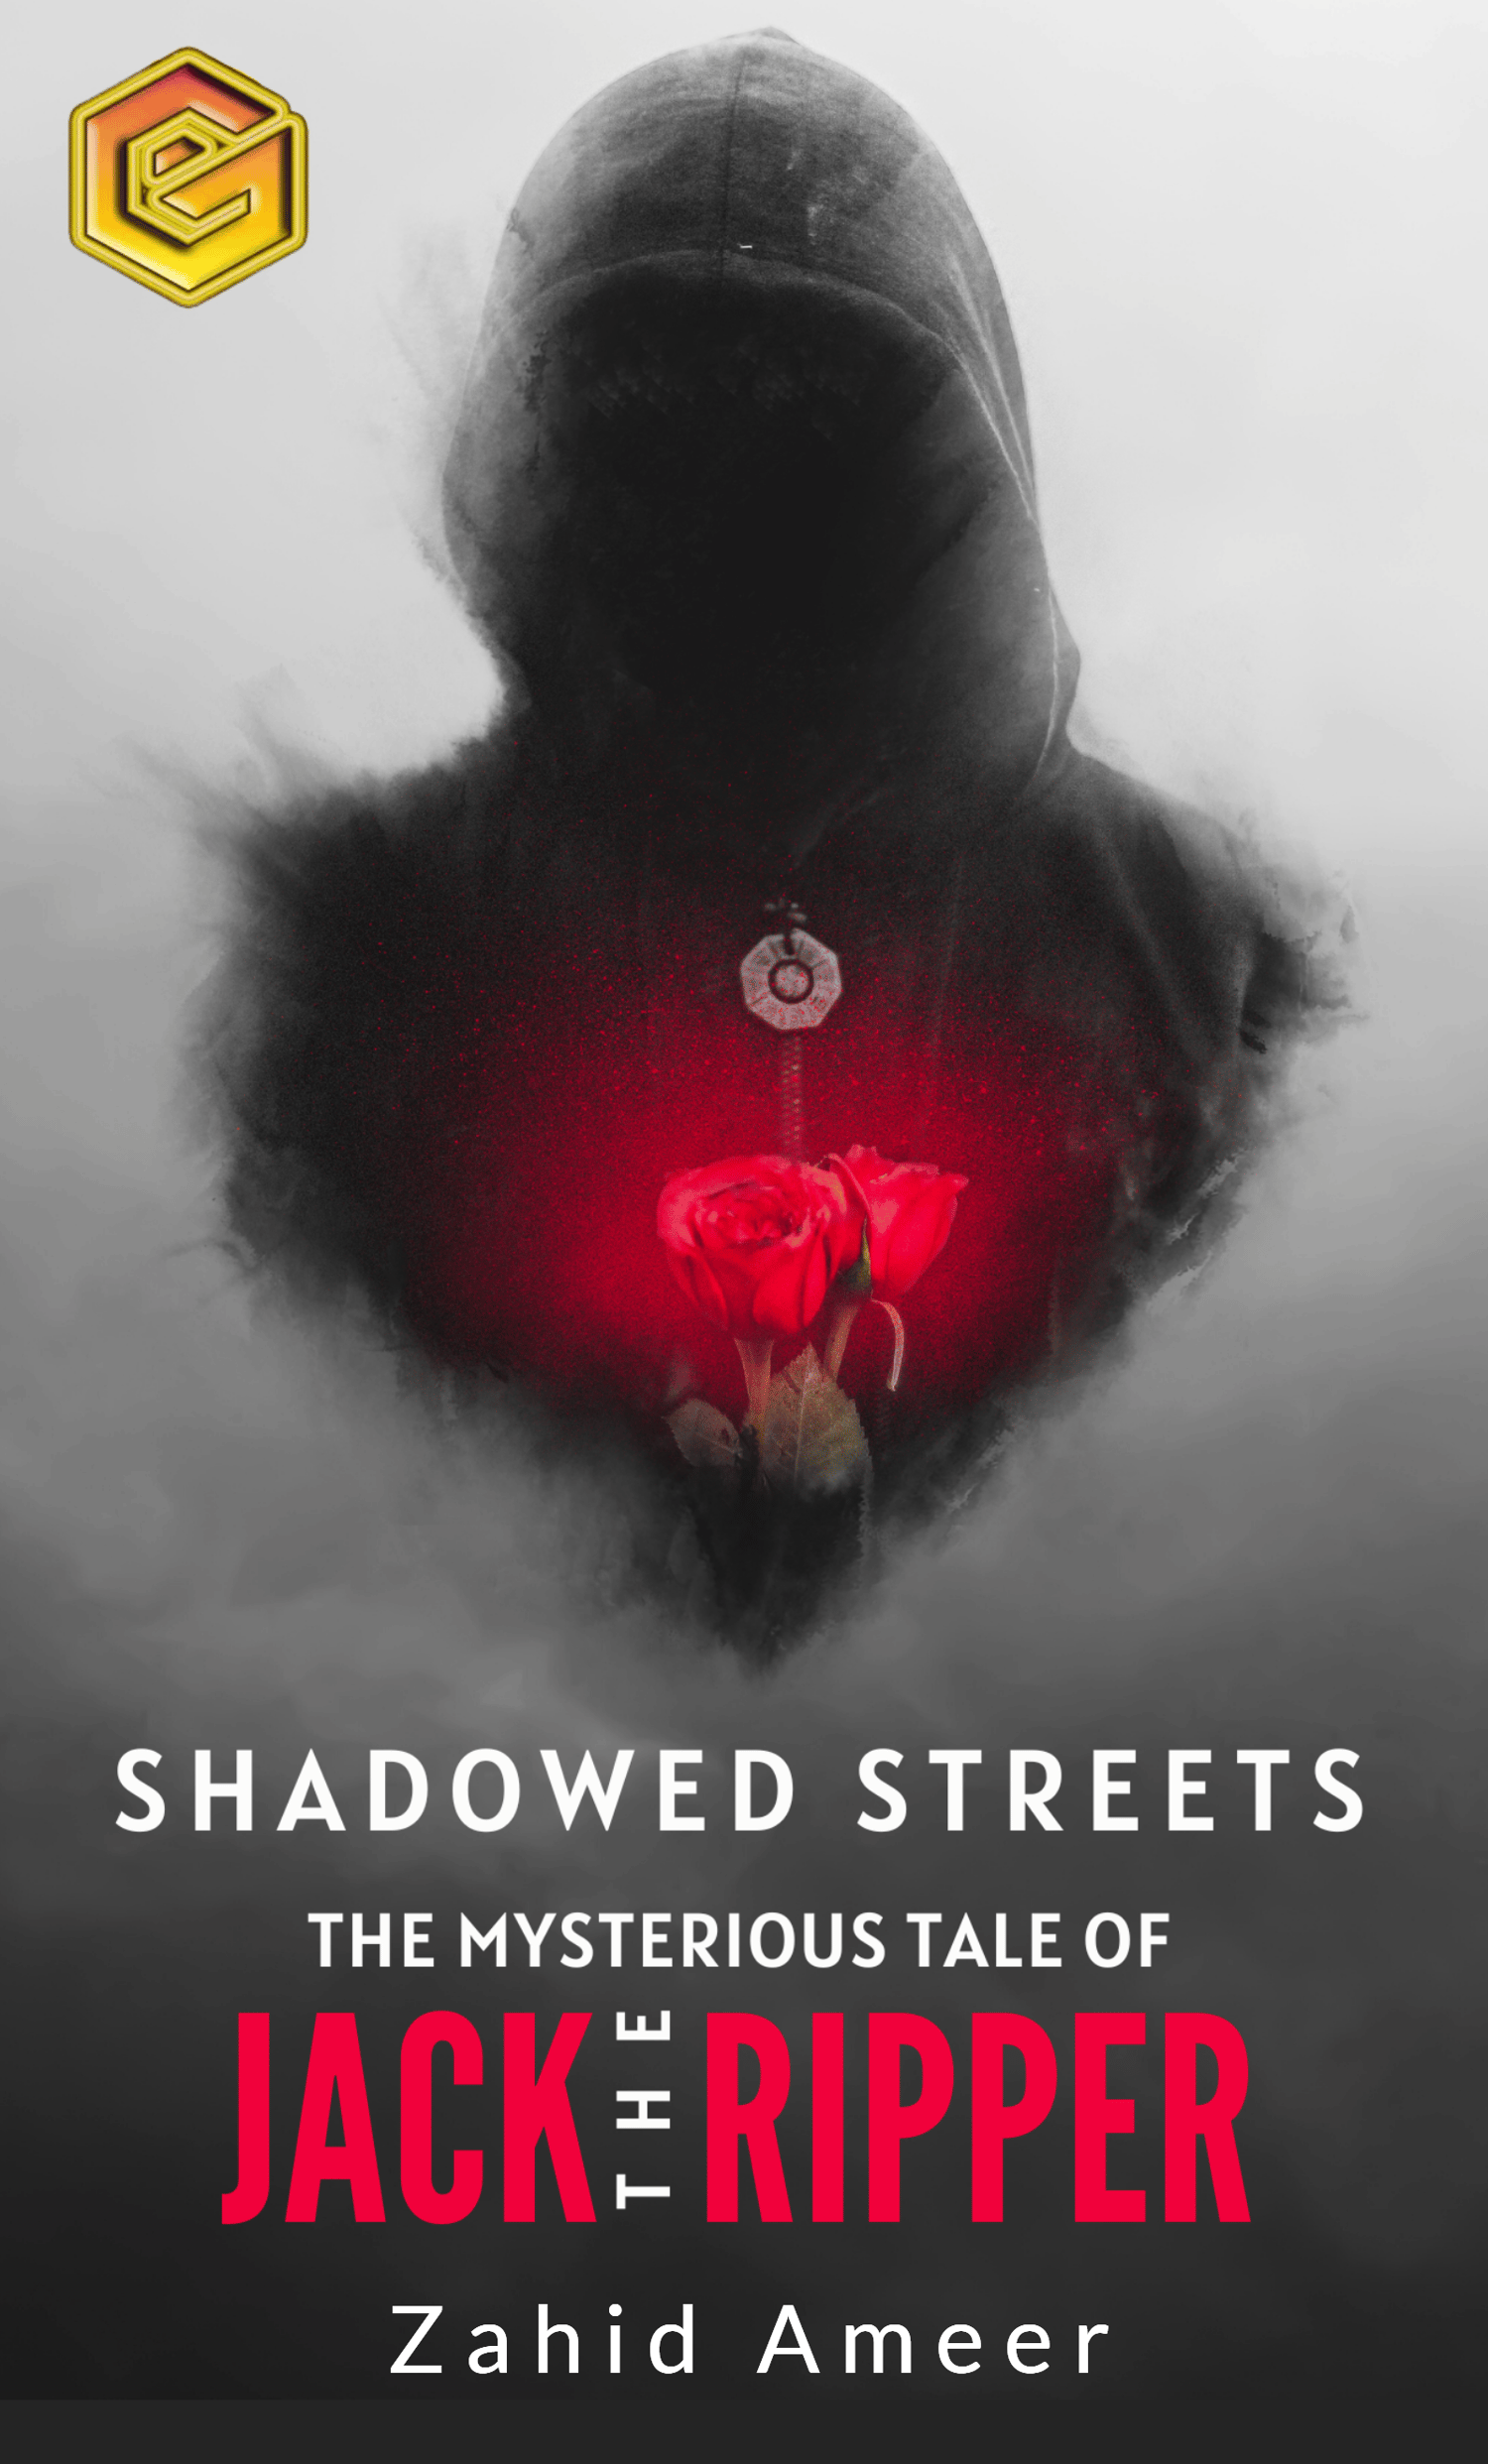 An enigmatic male face is partially obscured by a hoodie, set against shadowy streets. The image evokes a mysterious atmosphere, capturing the essence of 'Shadowed Streets: The Mysterious Tale of Jack The Ripper' eBook.